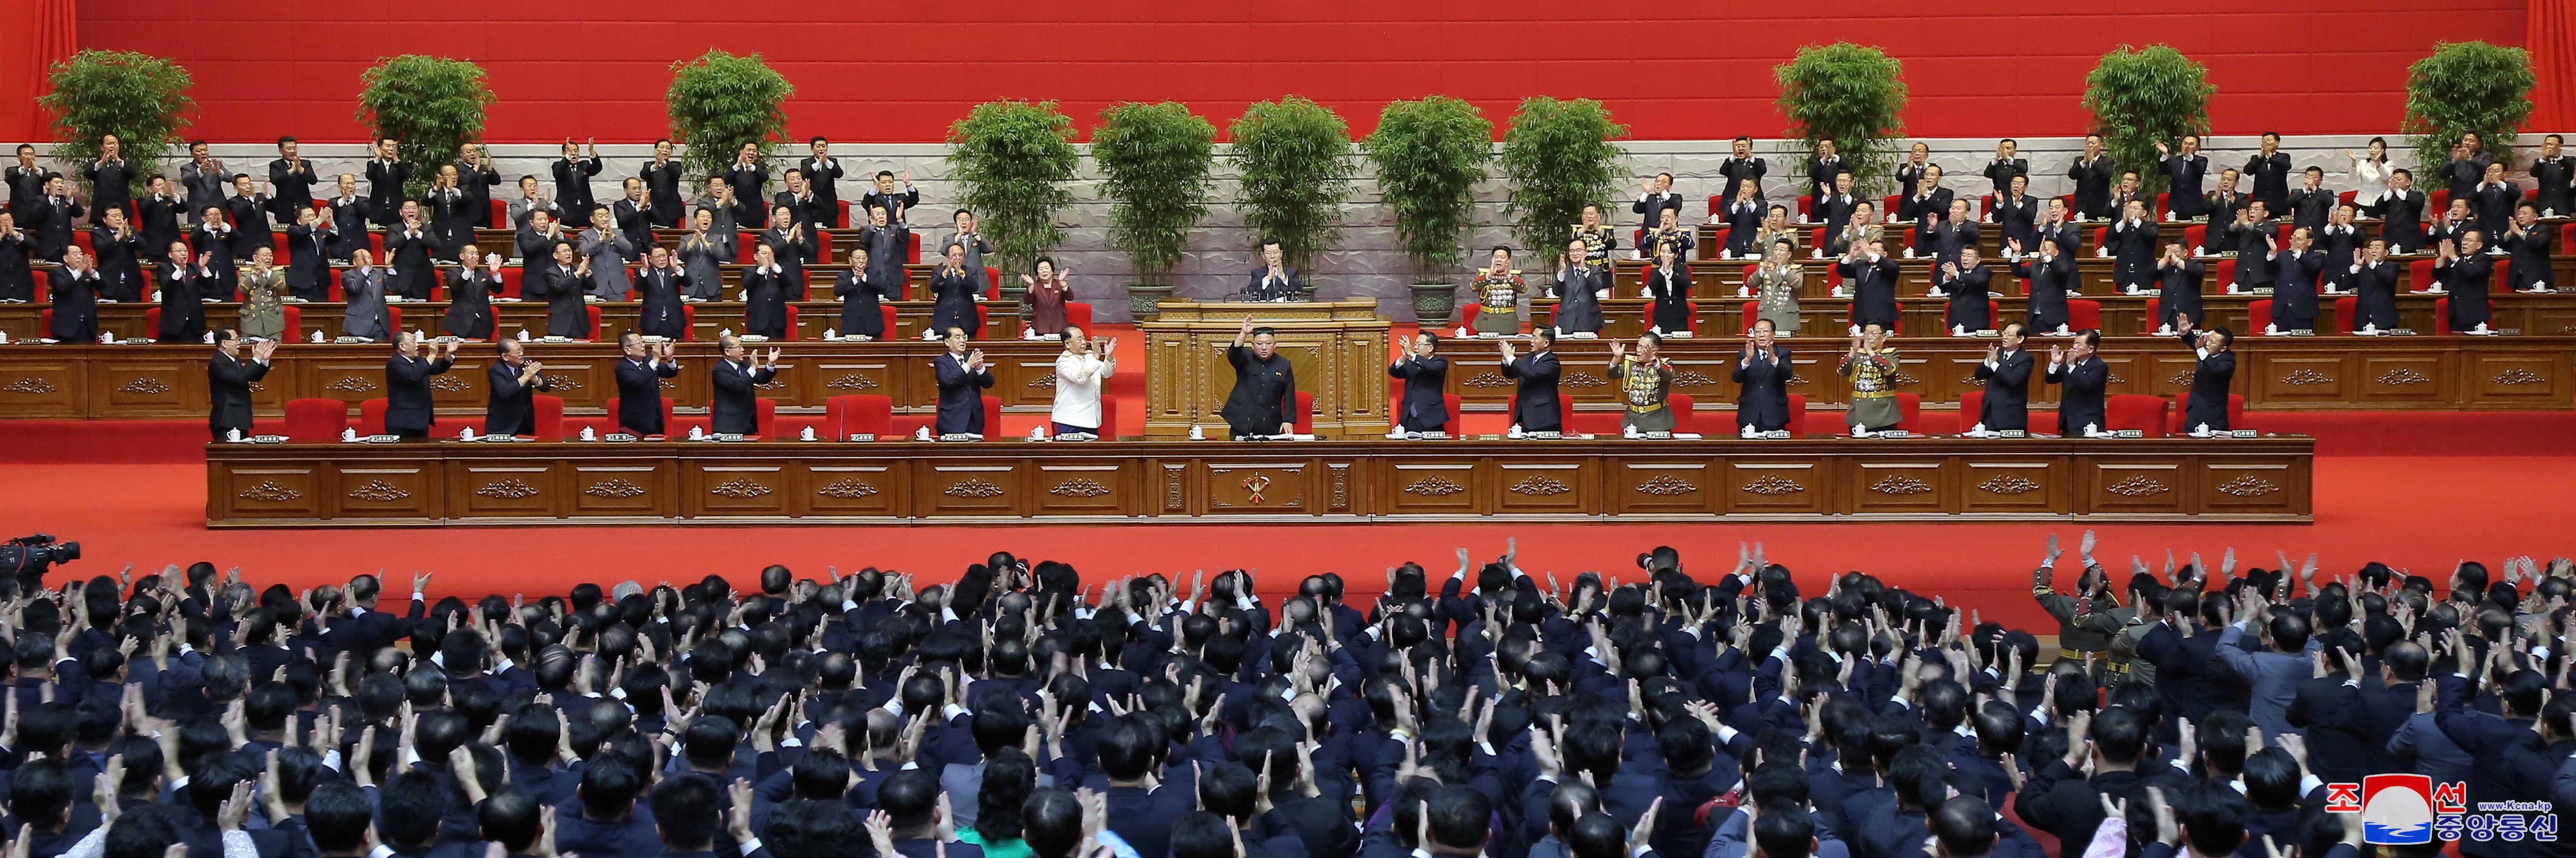 North Korean leader Kim Jong Un receives applause at the 8th Congress of the Workers' Party in Pyongyang